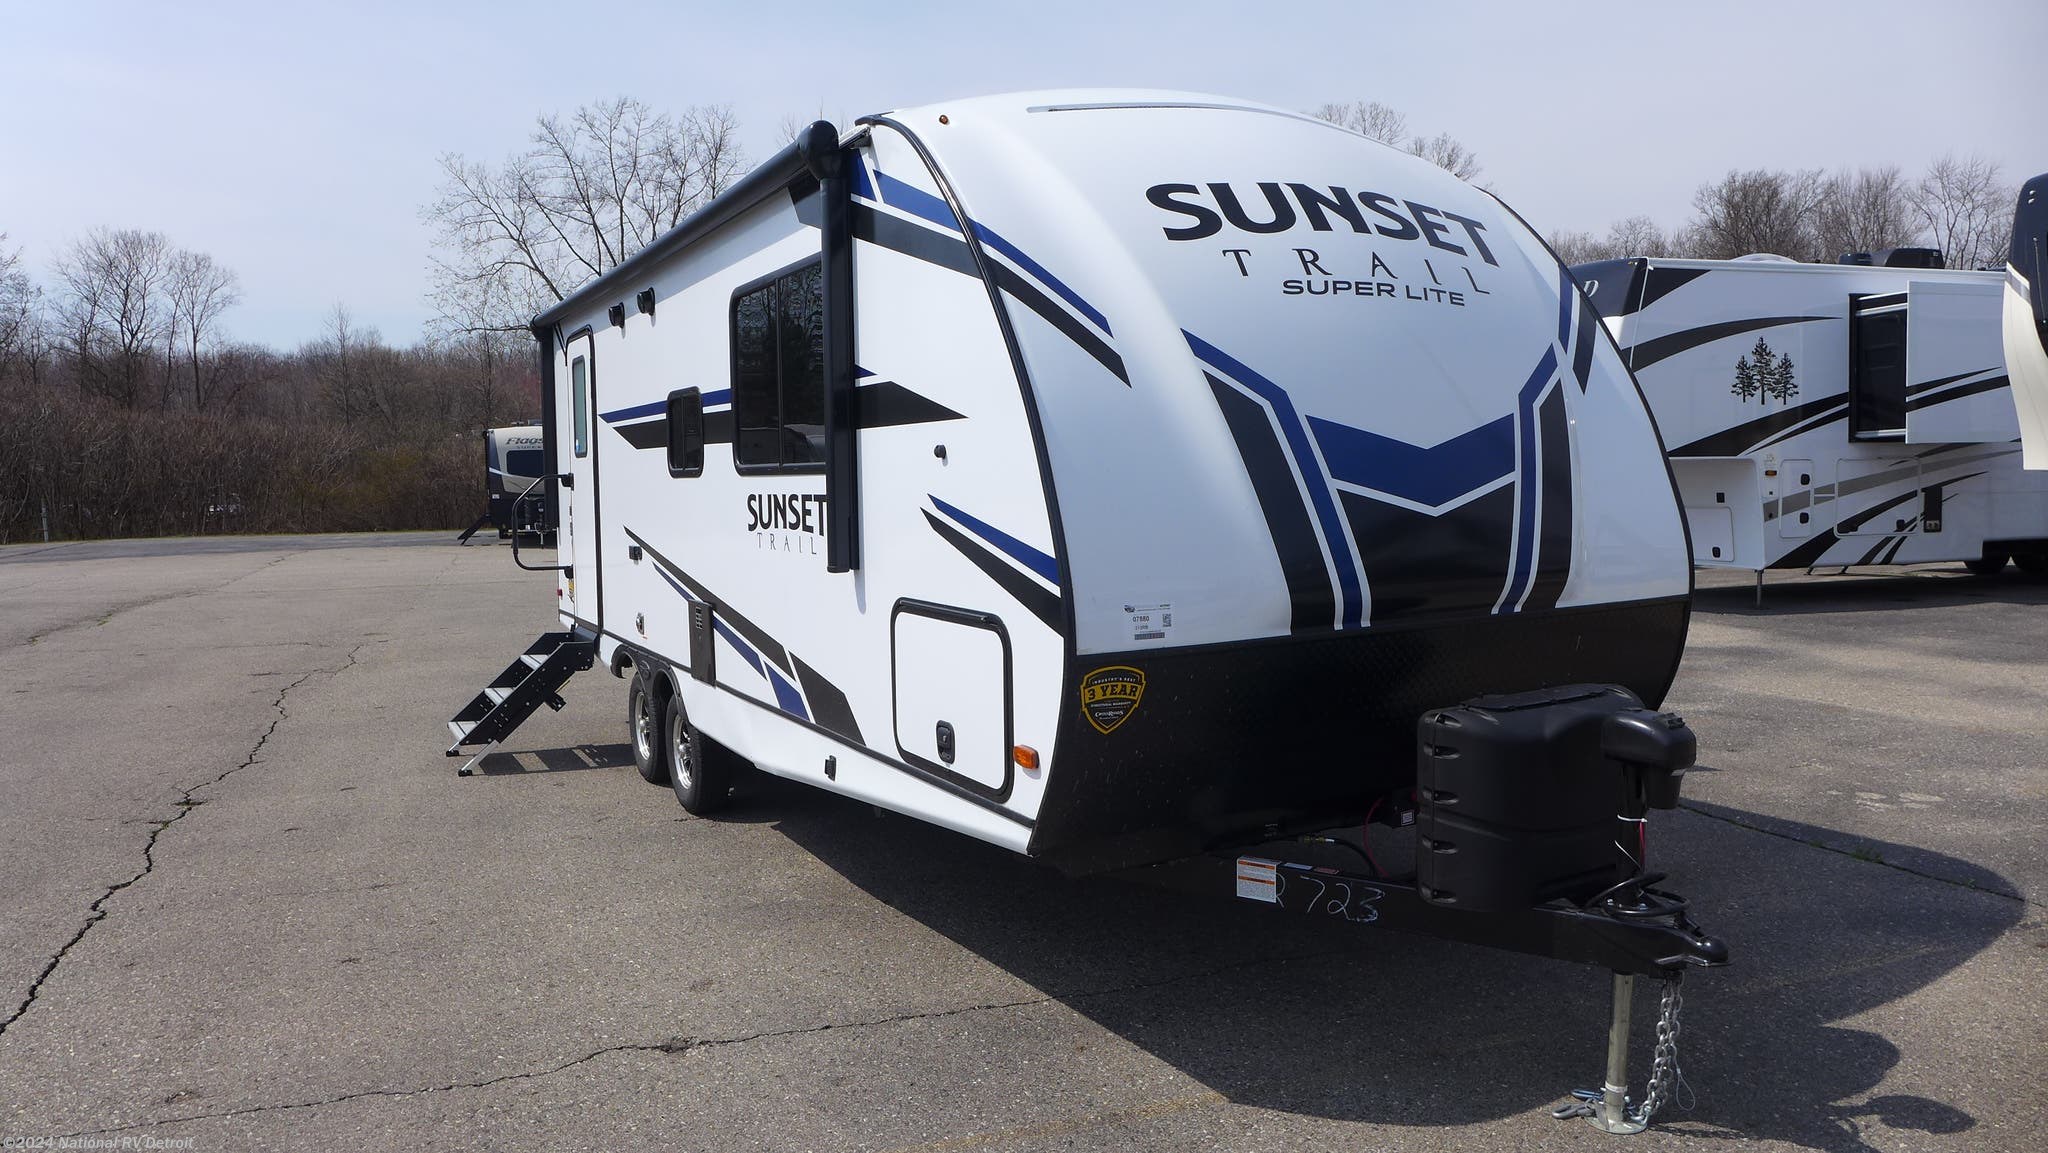 2021 Miscellaneous Sunset Trail 212RB RV for Sale in Belleville, MI